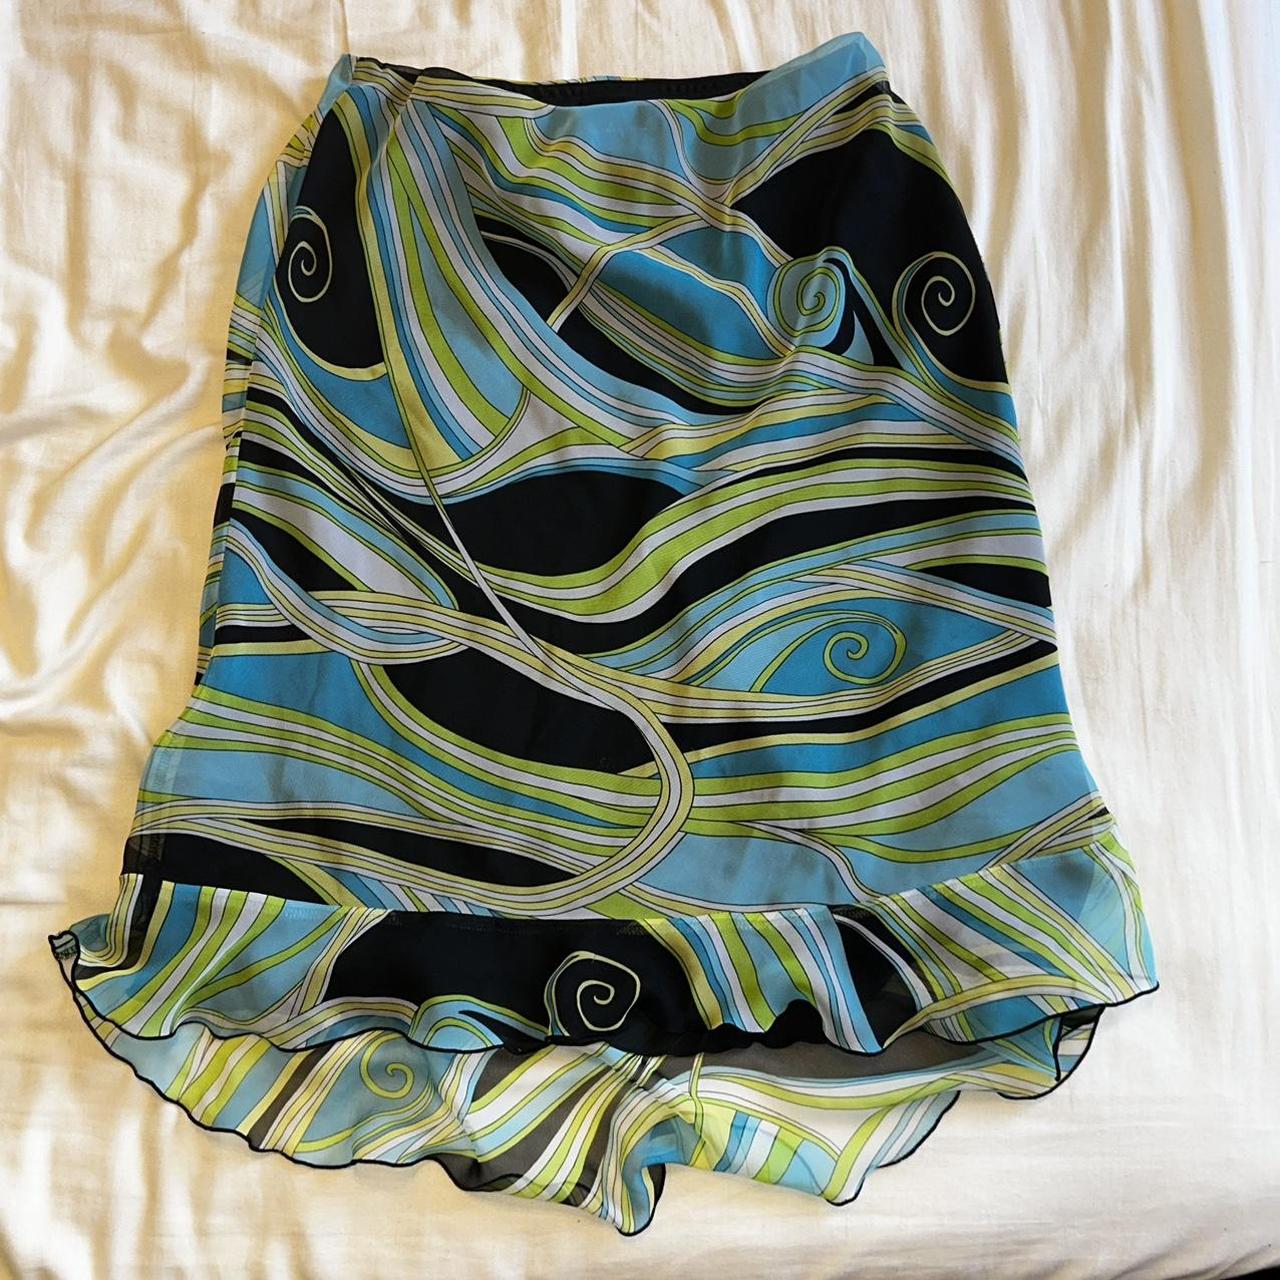 Emilio Pucci Women's Green and Blue Skirt